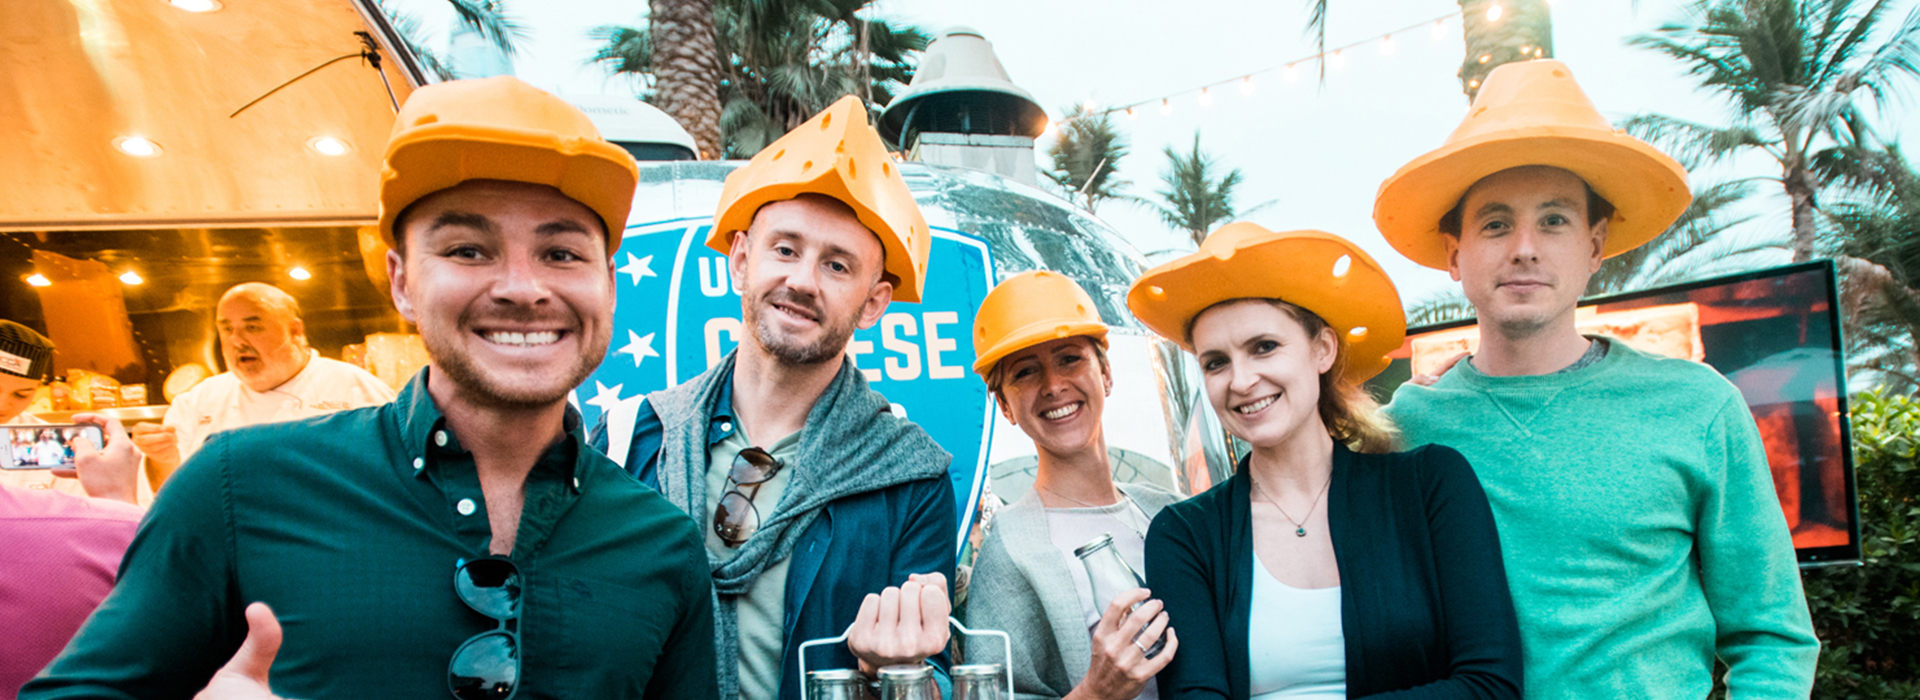 Participants with cheese hats